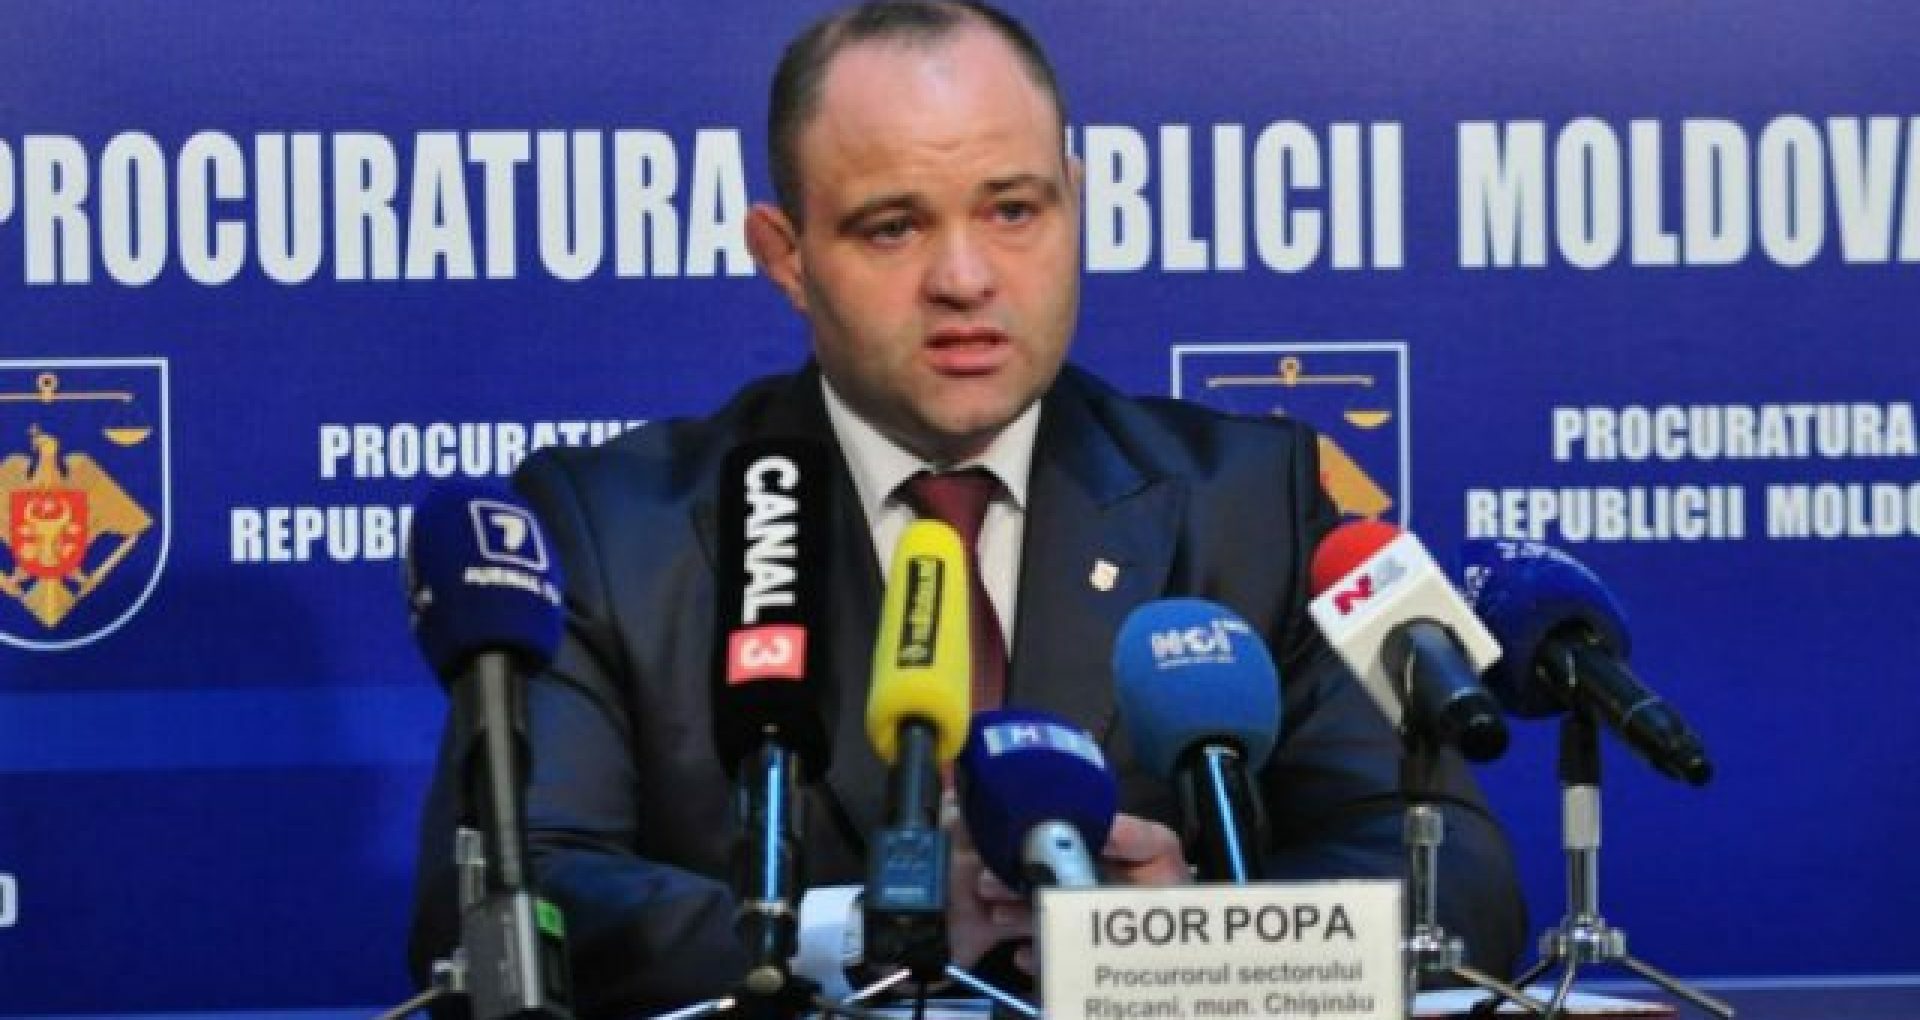 Igor Popa, Head of Chișinău Prosecutor’s Office, Ciocana Headquarters, was Detained for 72 hours being Accused of Illicit Enrichment